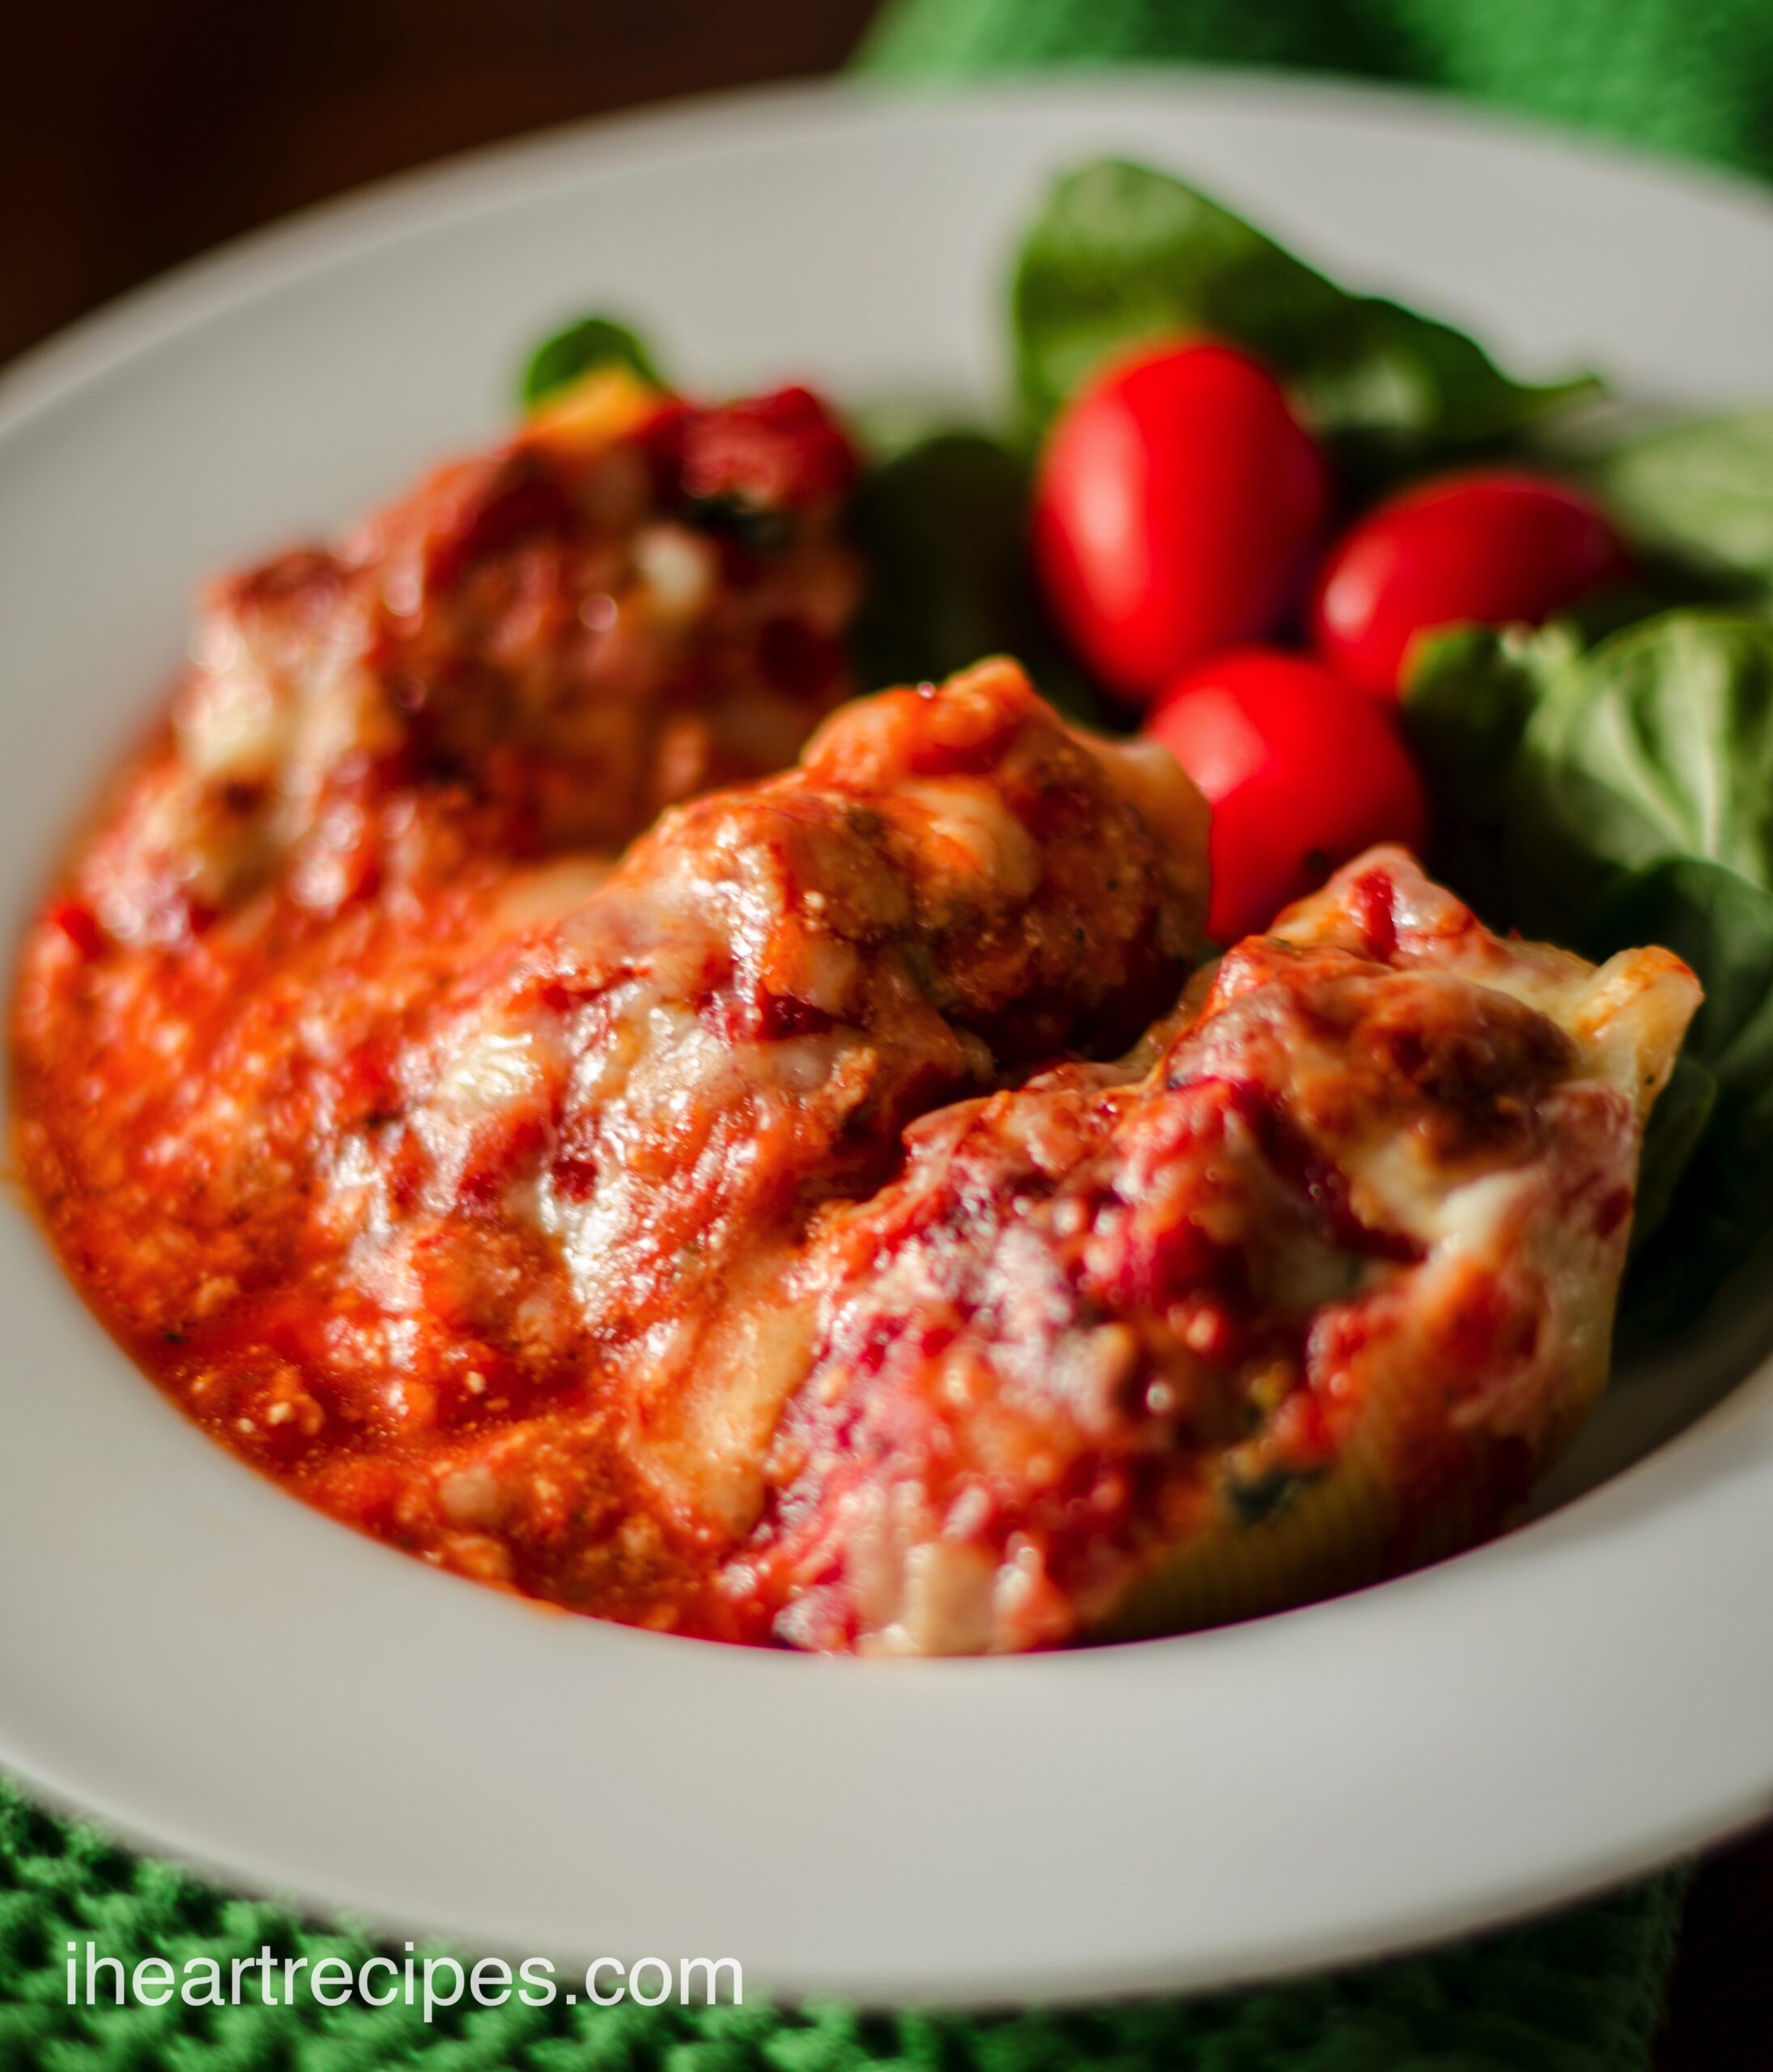 Italian baked stuffed shells served in a bowl with a salad.